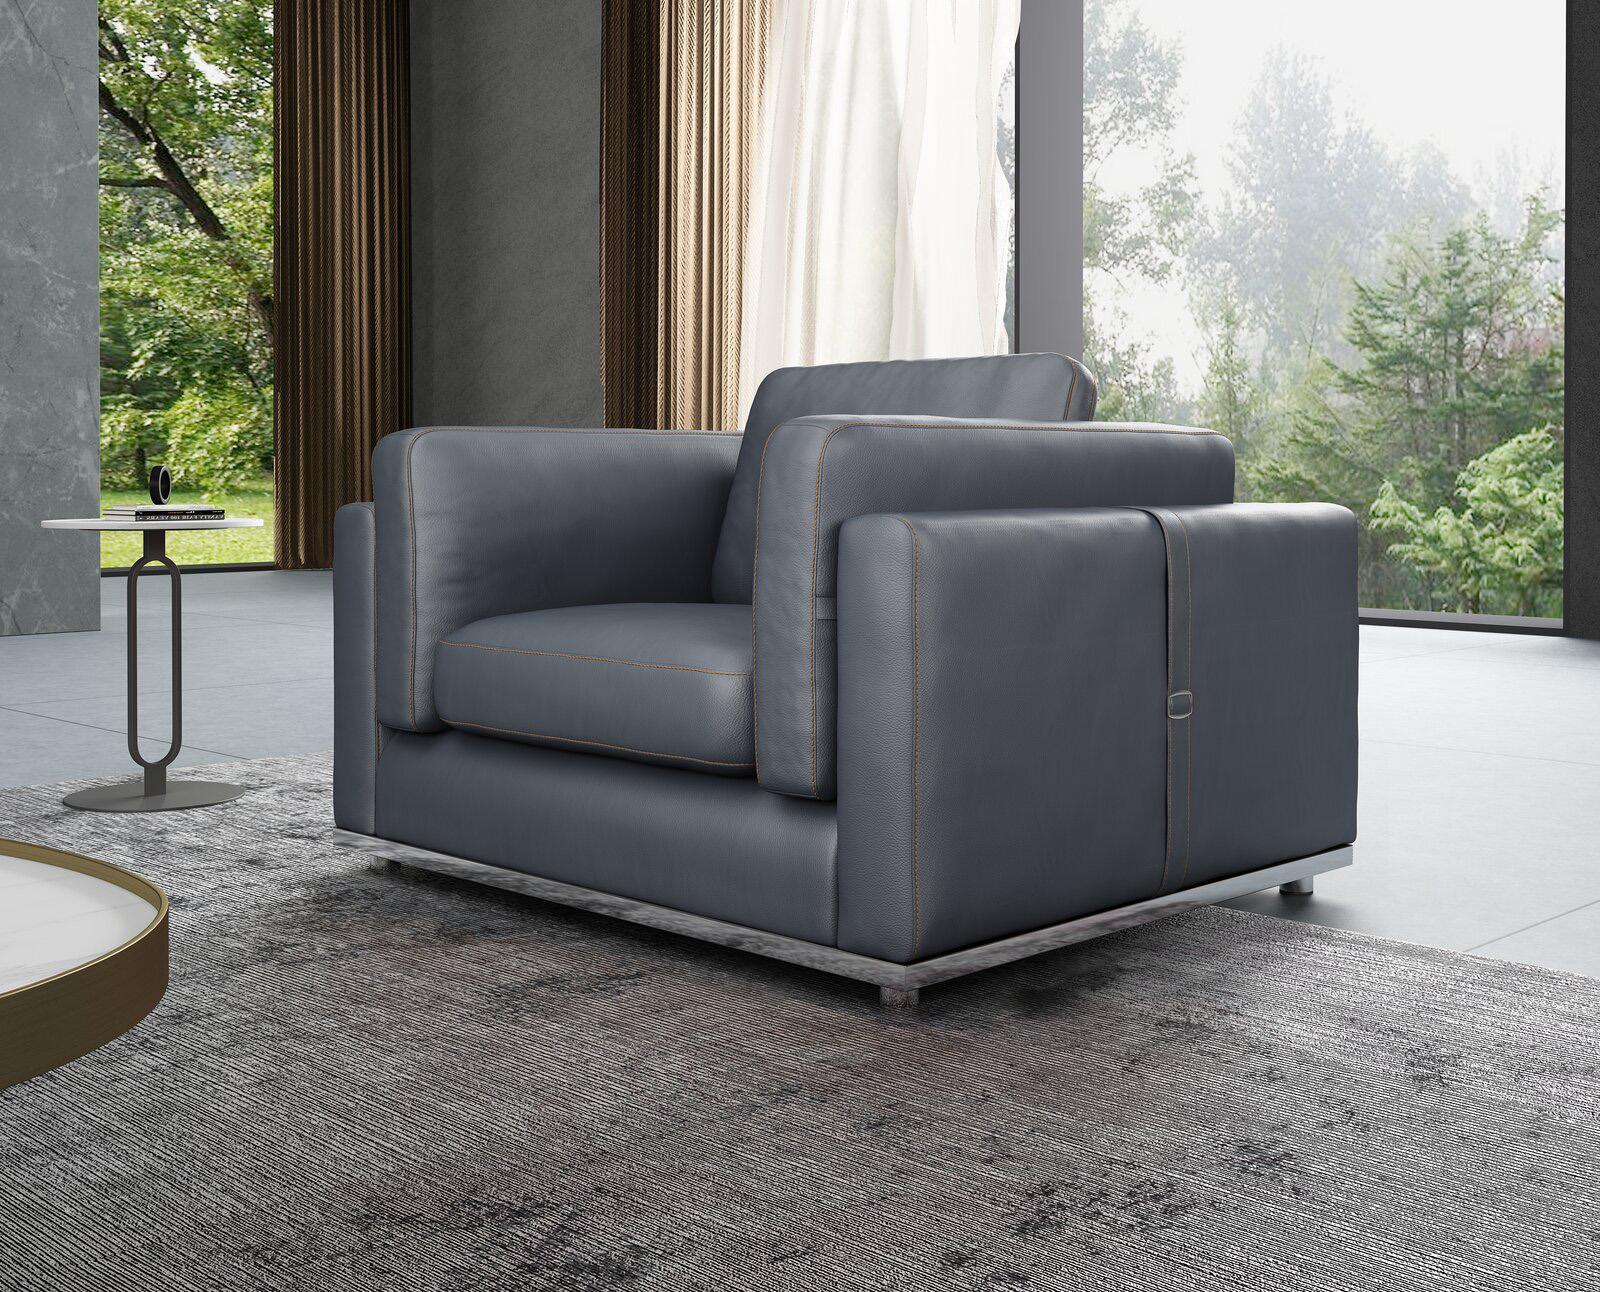 Contemporary, Modern Arm Chair PICASSO EF-25550-C in Smoke, Gray Leather